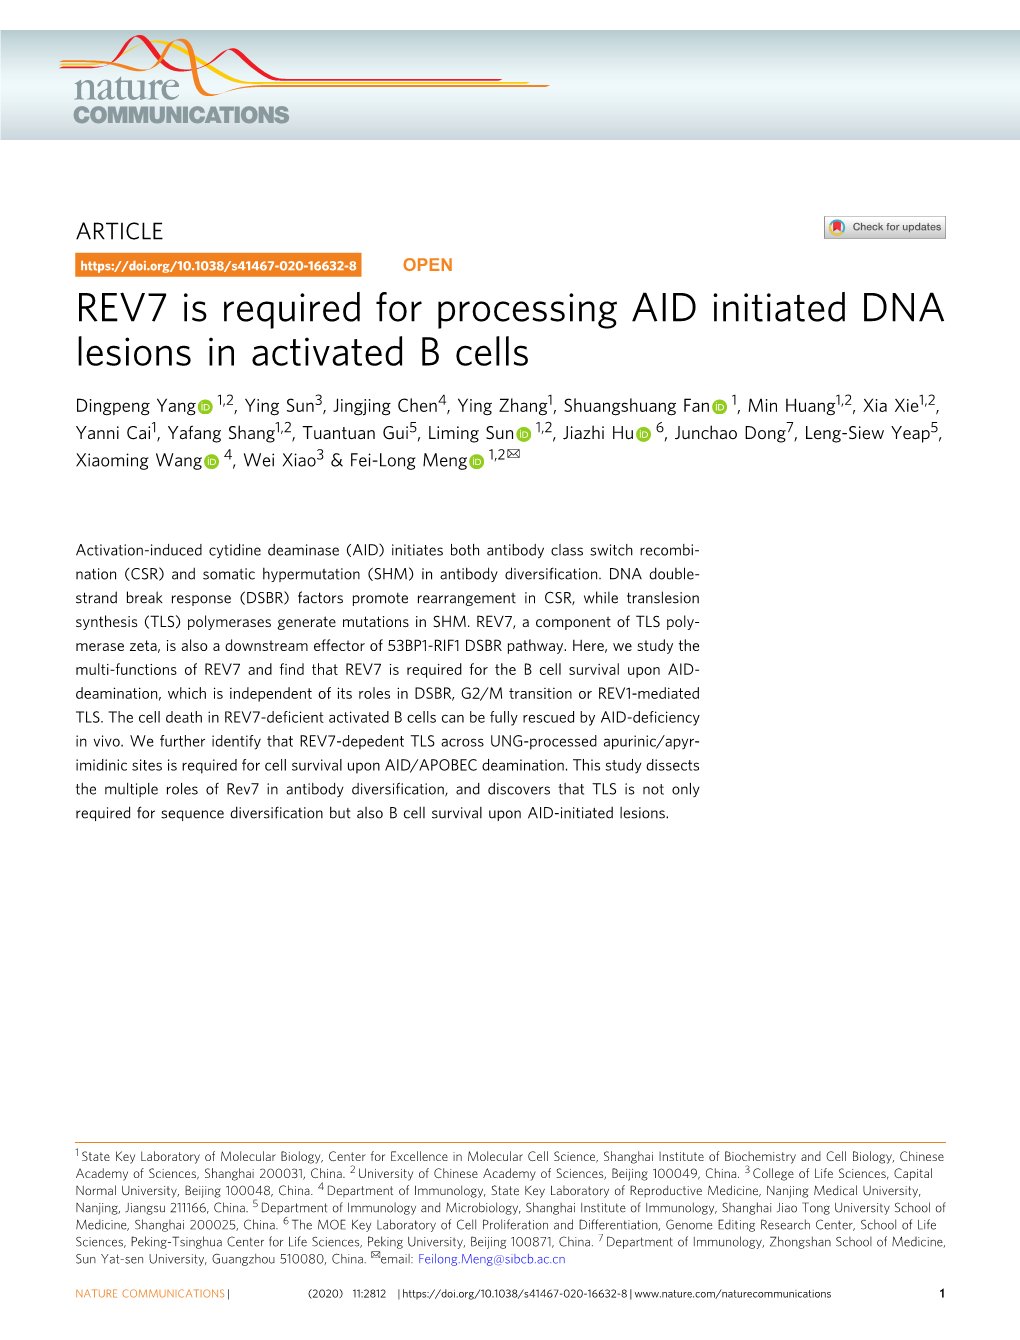 REV7 Is Required for Processing AID Initiated DNA Lesions in Activated B Cells